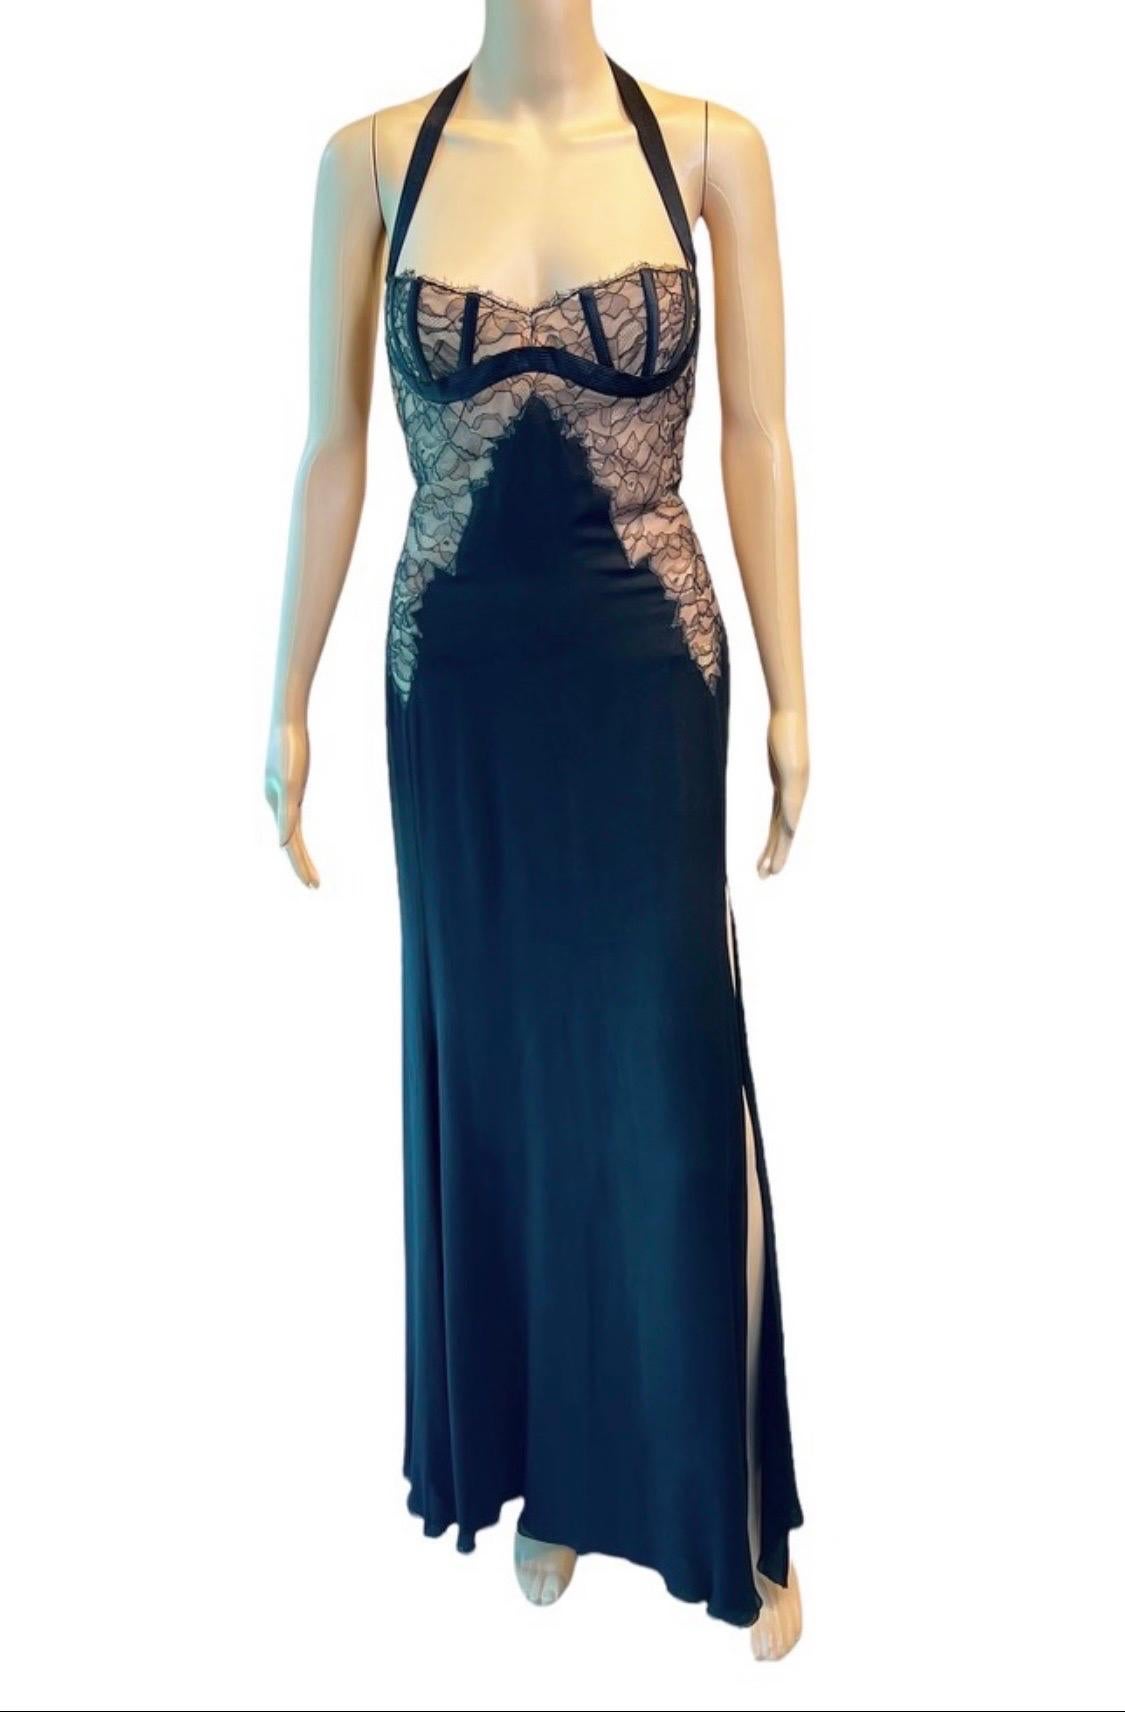 Gianni Versace S/S 1992 Bustier Lace Bra Sheer Panels Slit Evening Dress Gown For Sale 1